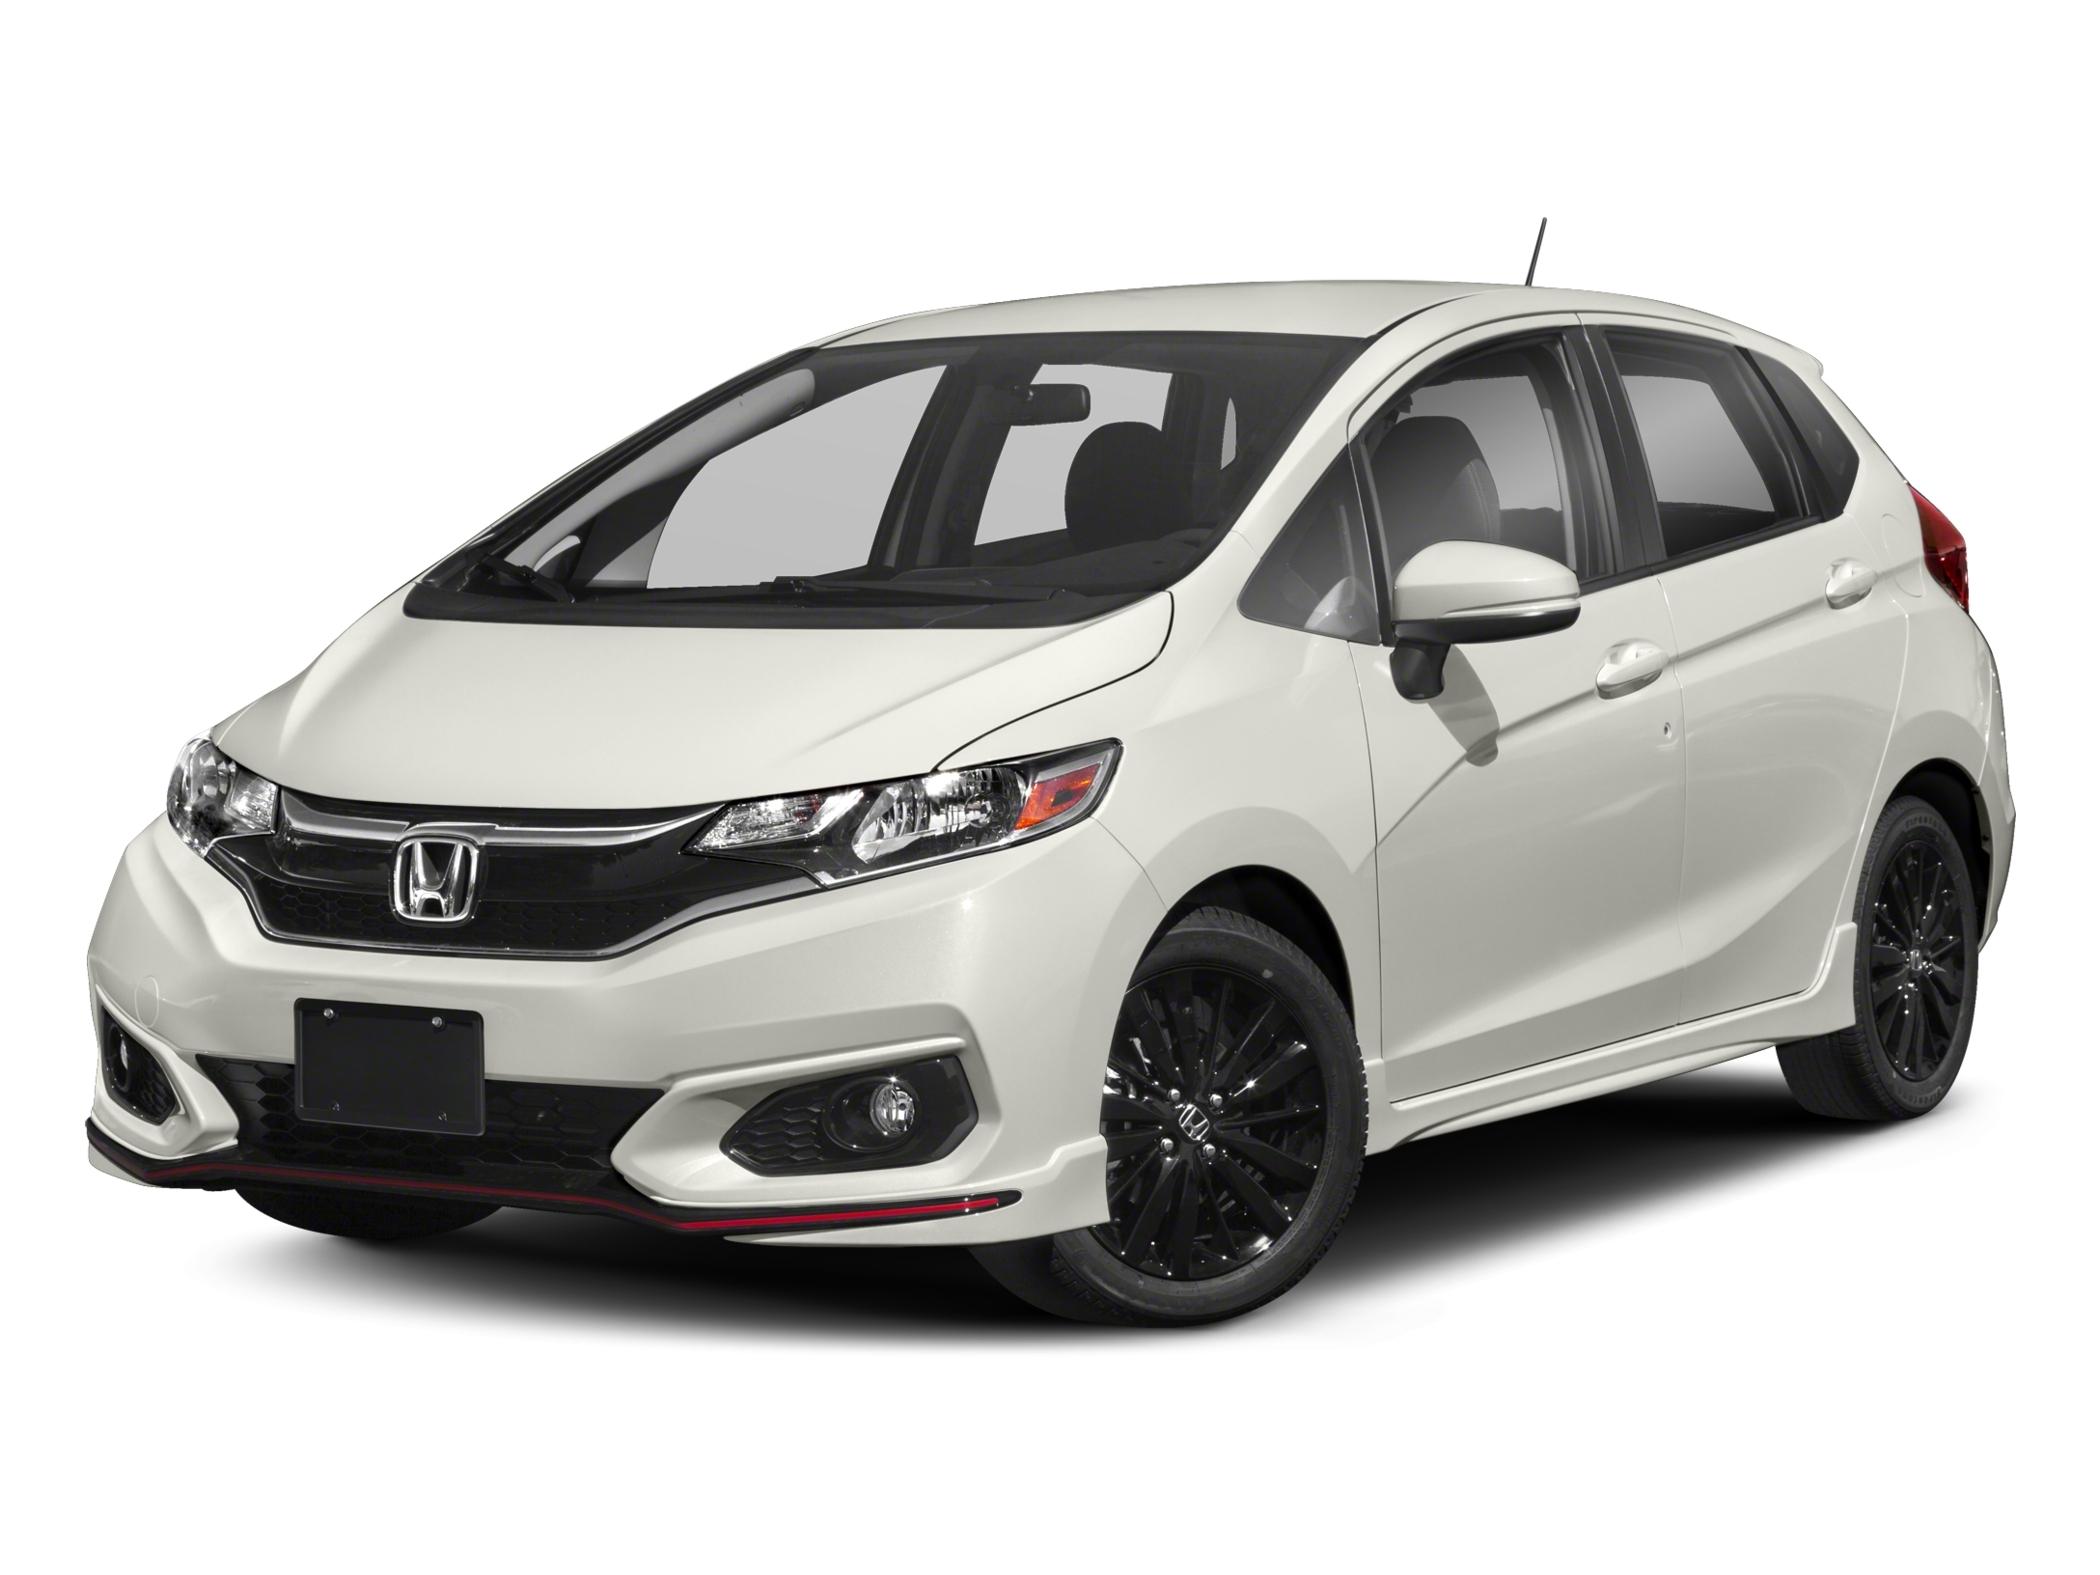 2018 Honda Fit Reviews, Price, MPG and More | Capital One Auto Navigator